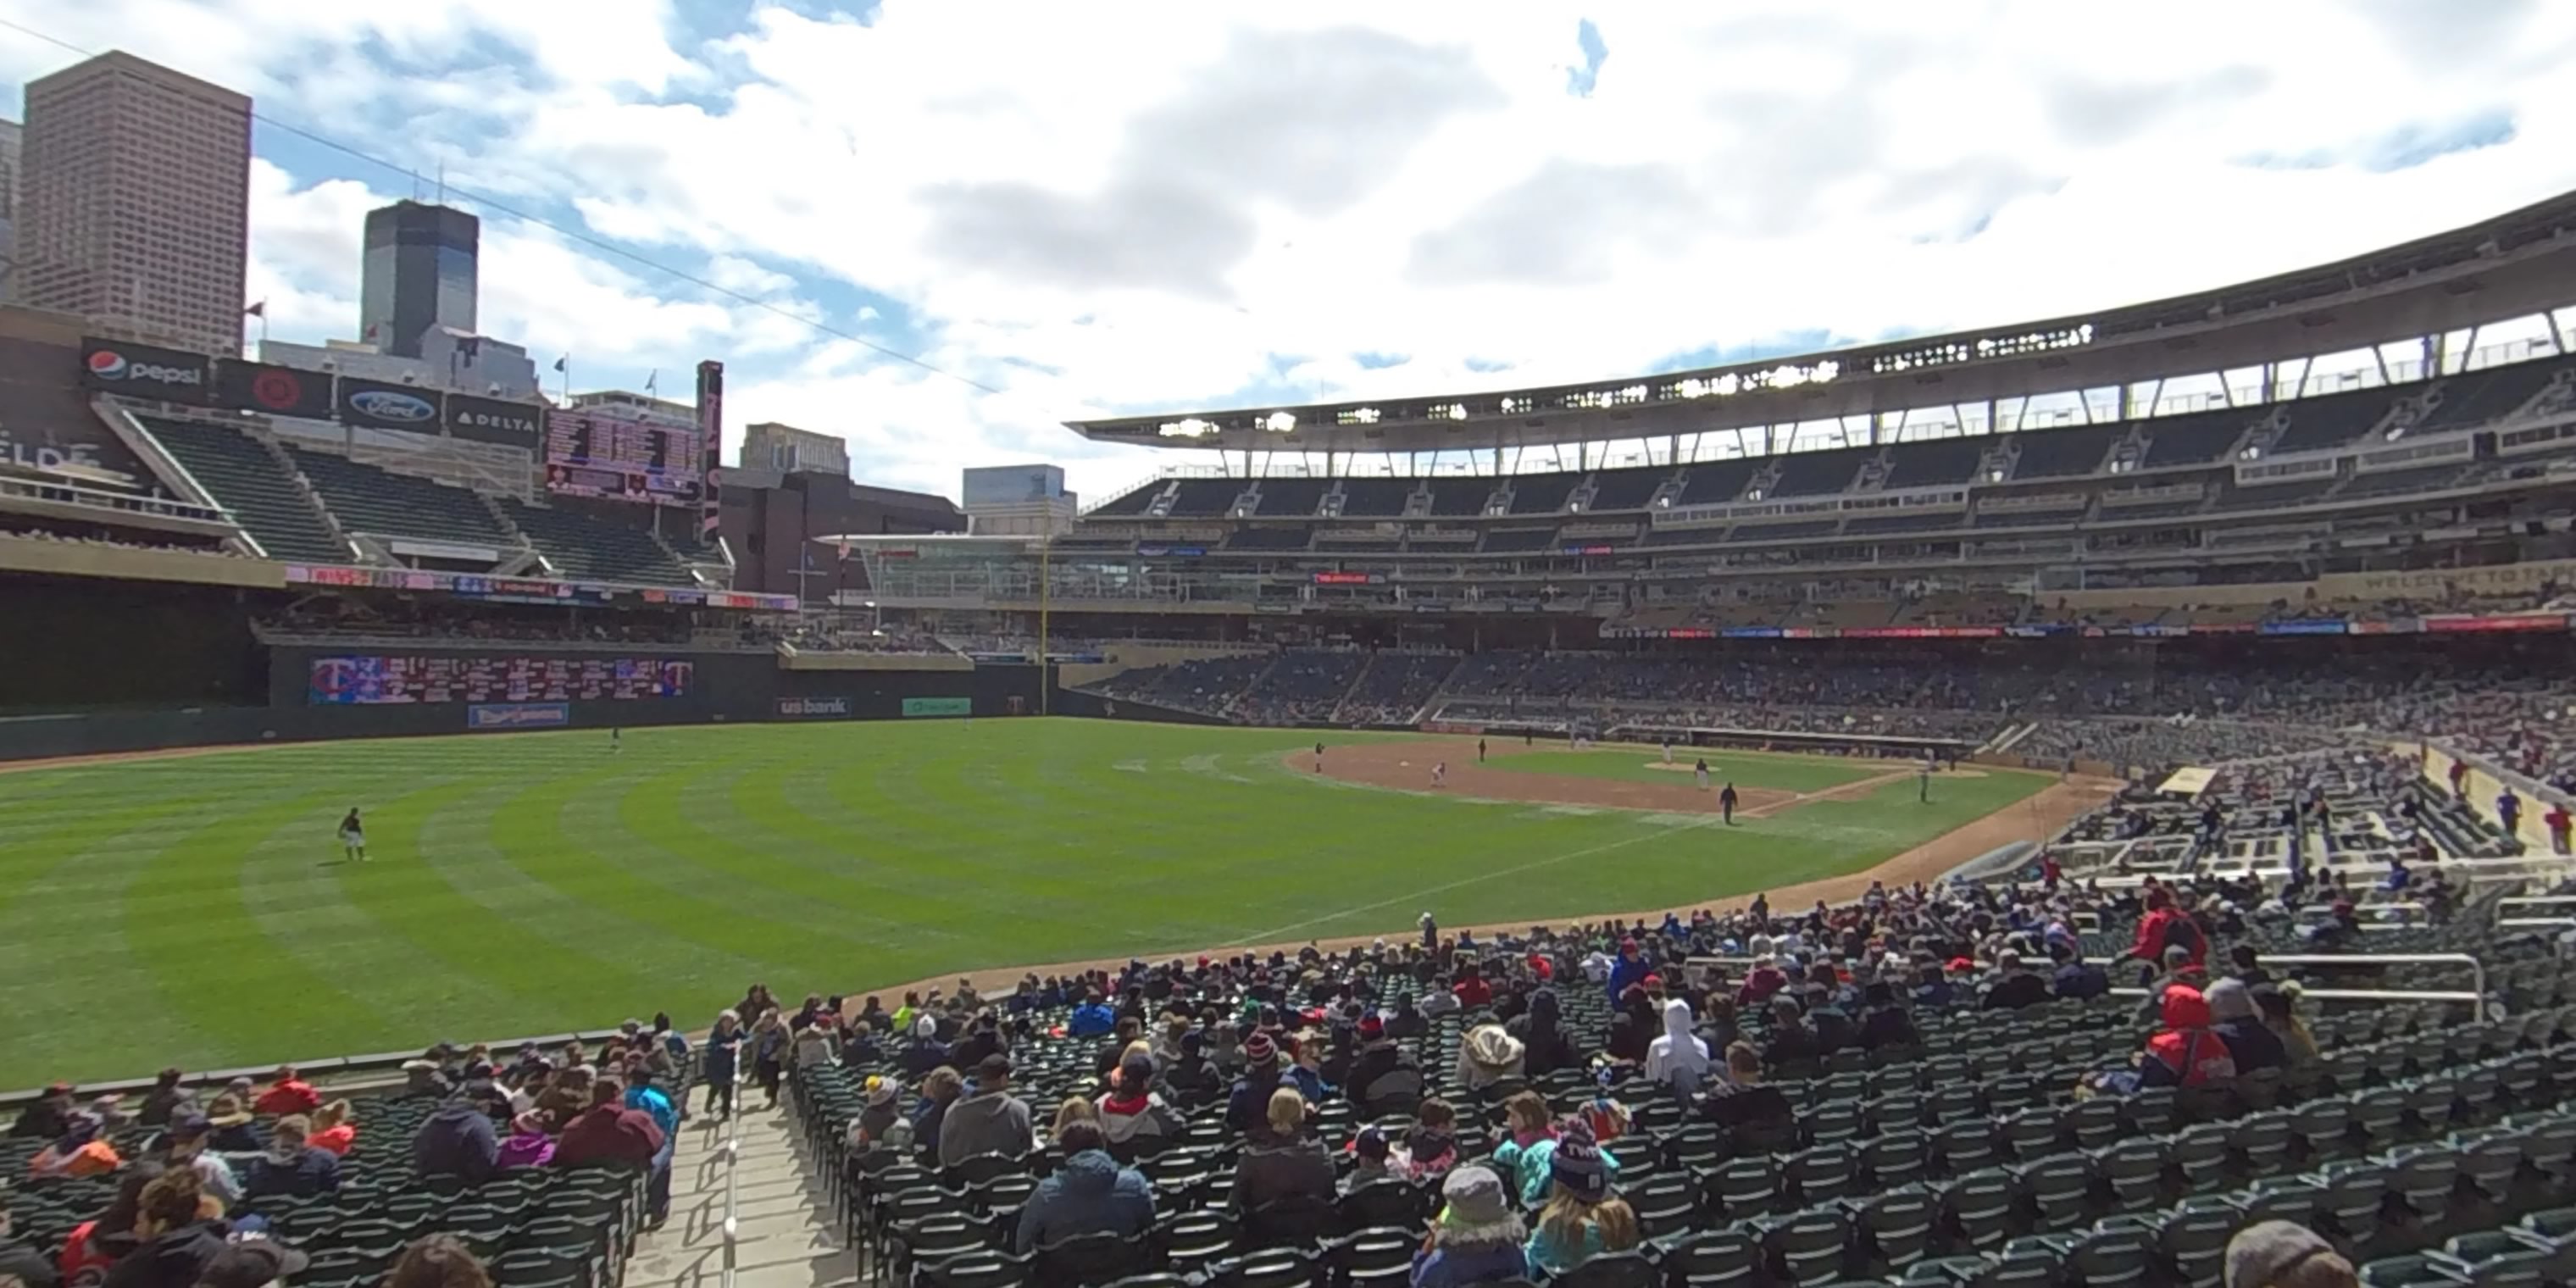 Section 126 at Target Field 